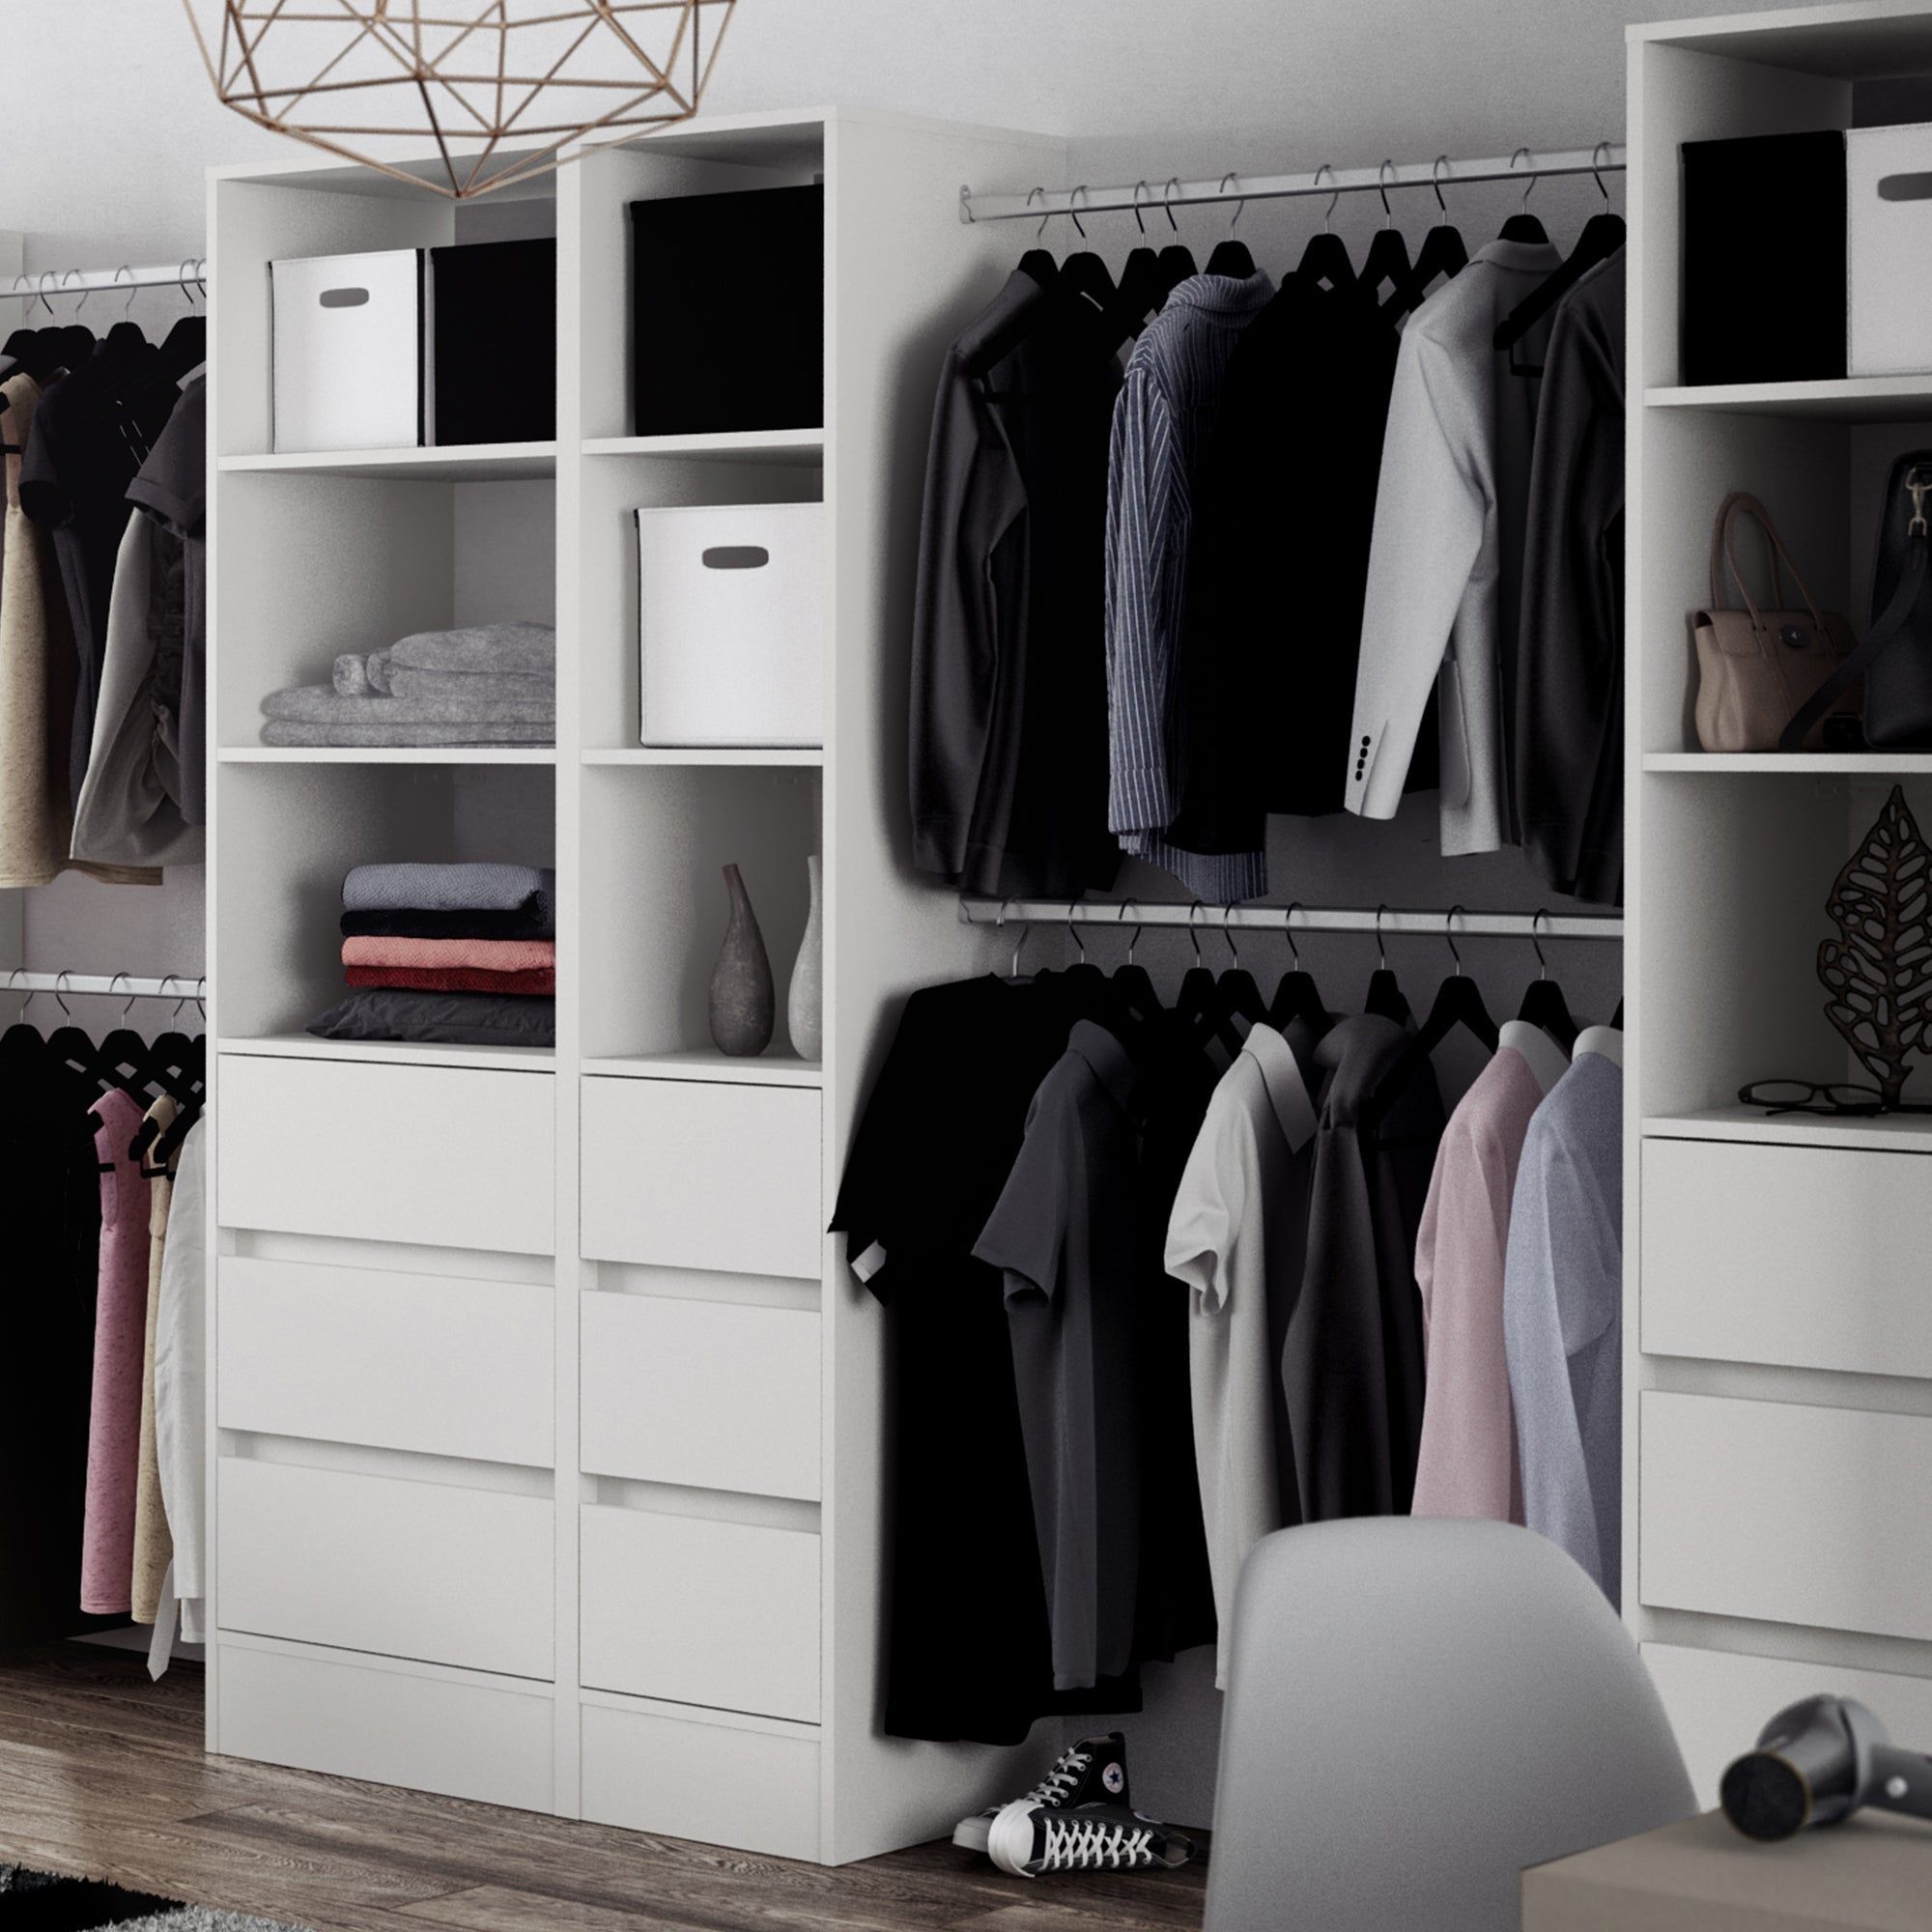 White Deluxe 3 Drawer Wardrobe Tower Shelving Unit With Hanging Bars –  Interiors Plus With Regard To Widely Used 3 Shelving Towers Wardrobes (View 3 of 10)